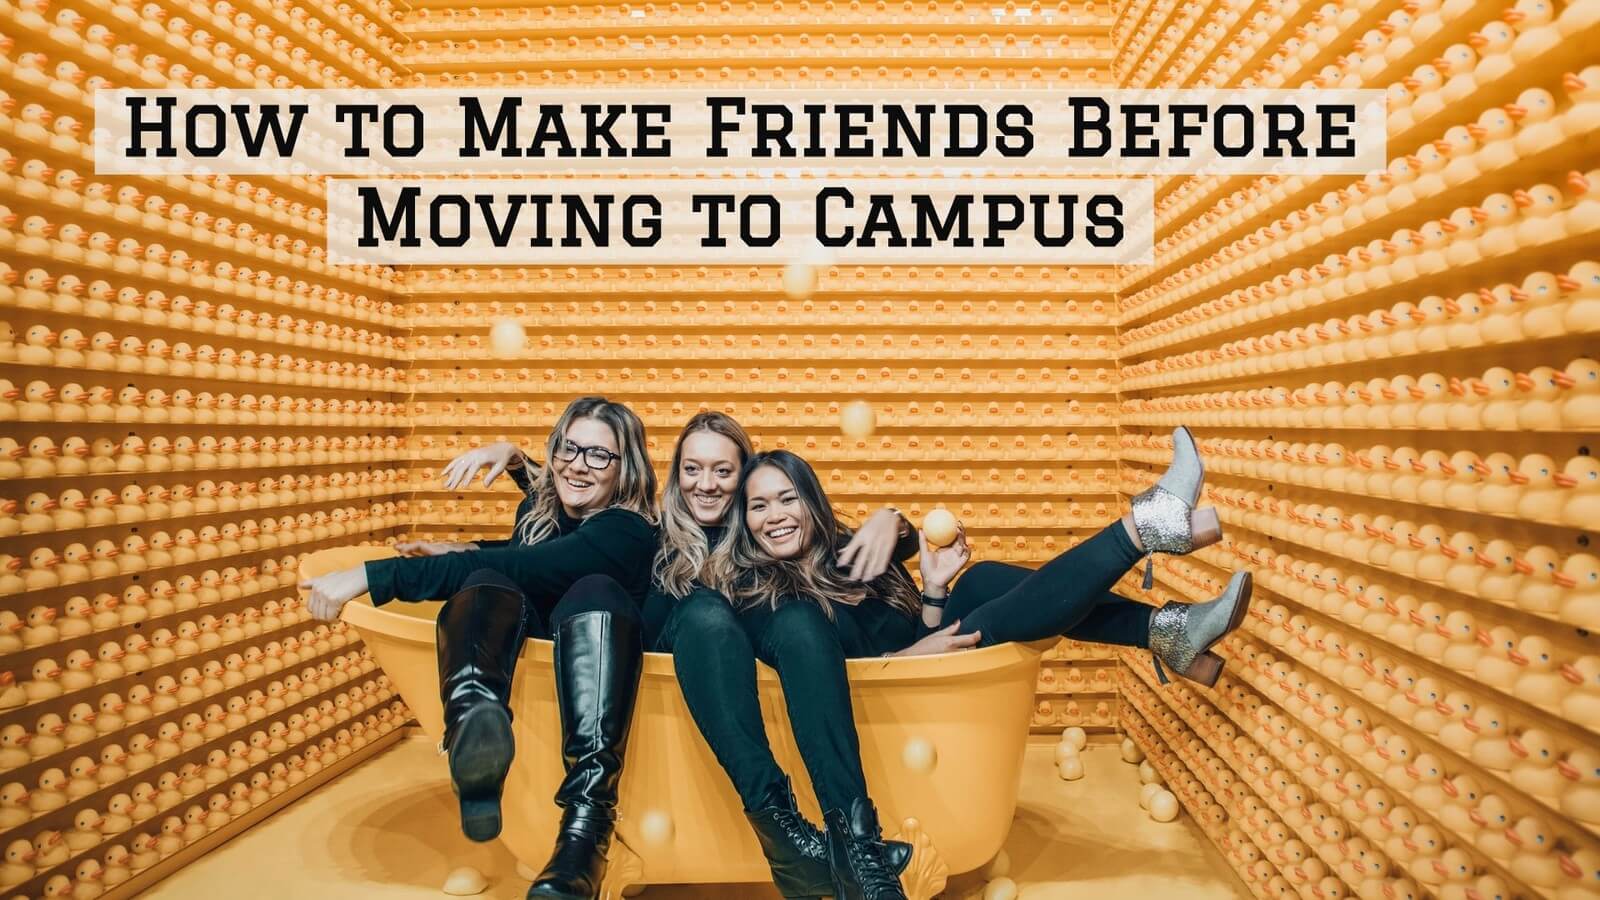 Ways to Make Friends Before Moving to Campus